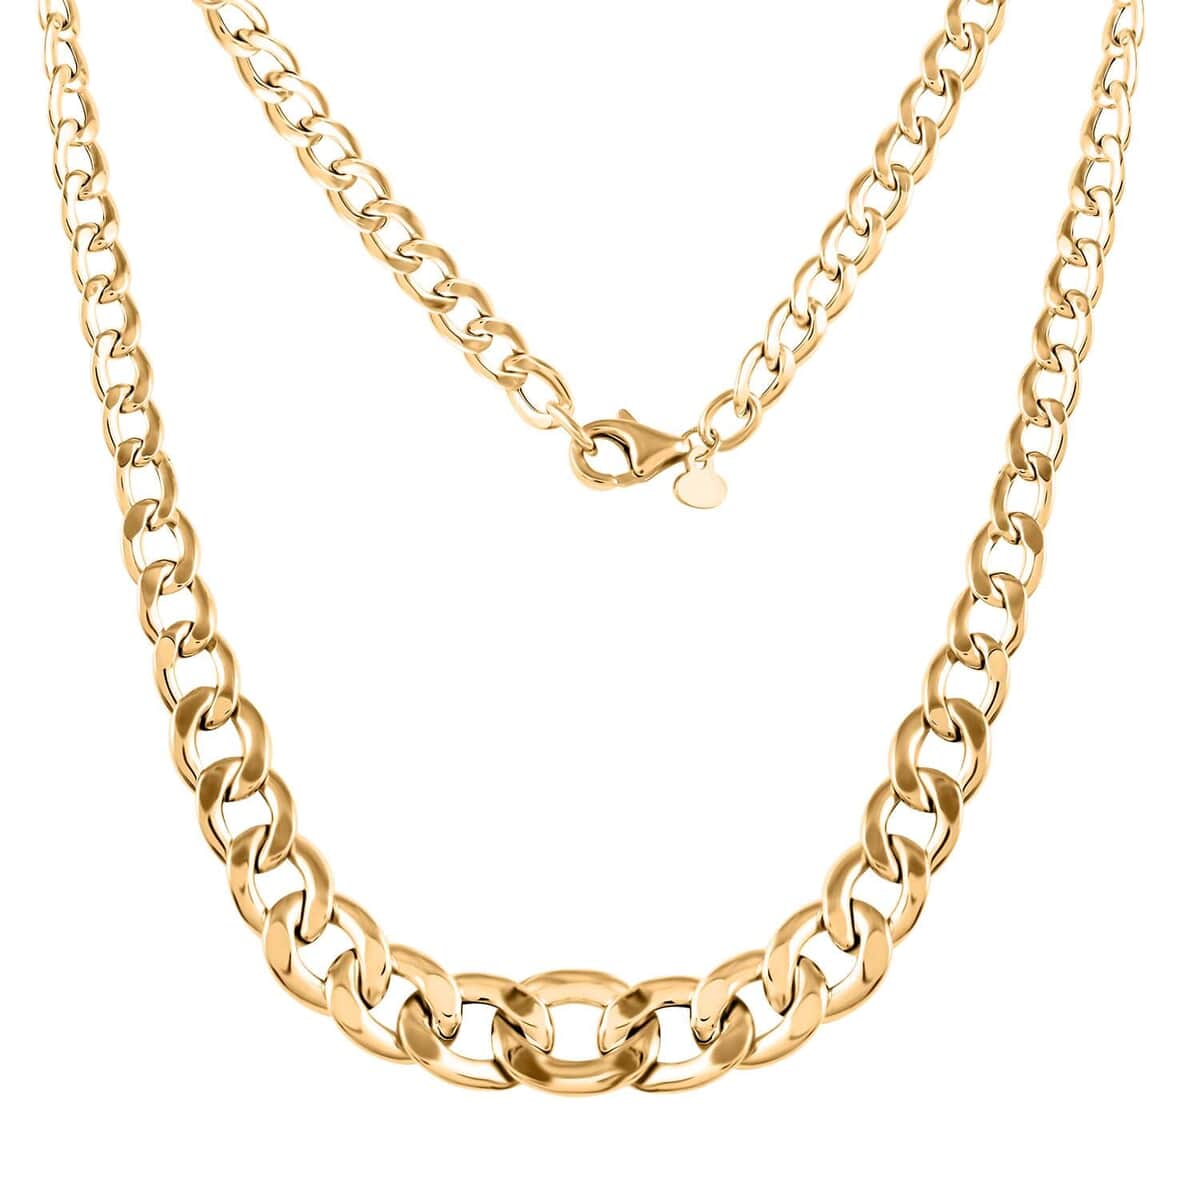 Buy Melodia Italian 14K Yellow Gold Graduated Mirror Curb Necklace 18 ...